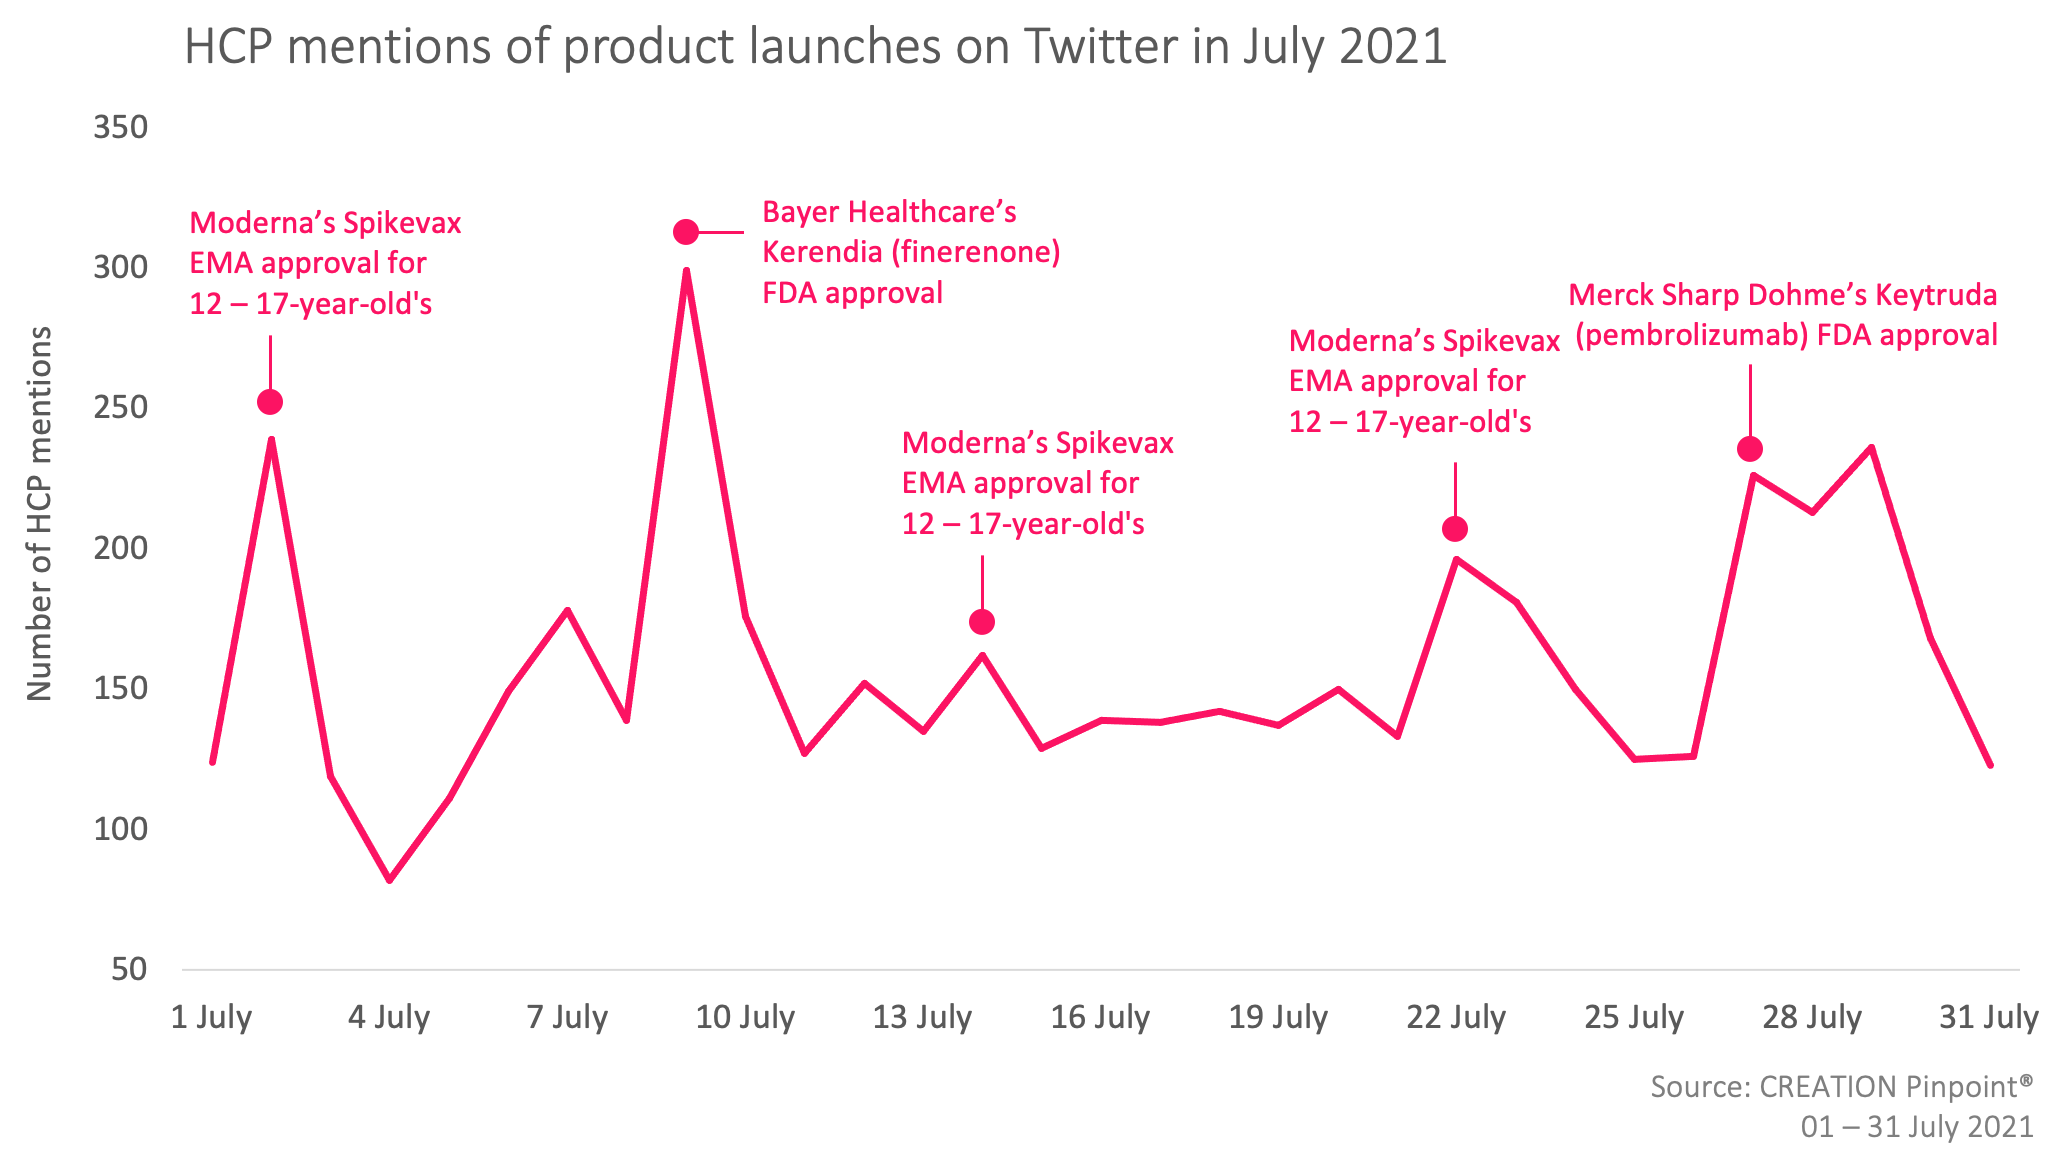 An image of a graph showing HCP mentions of product launches on Twitter in July 2021